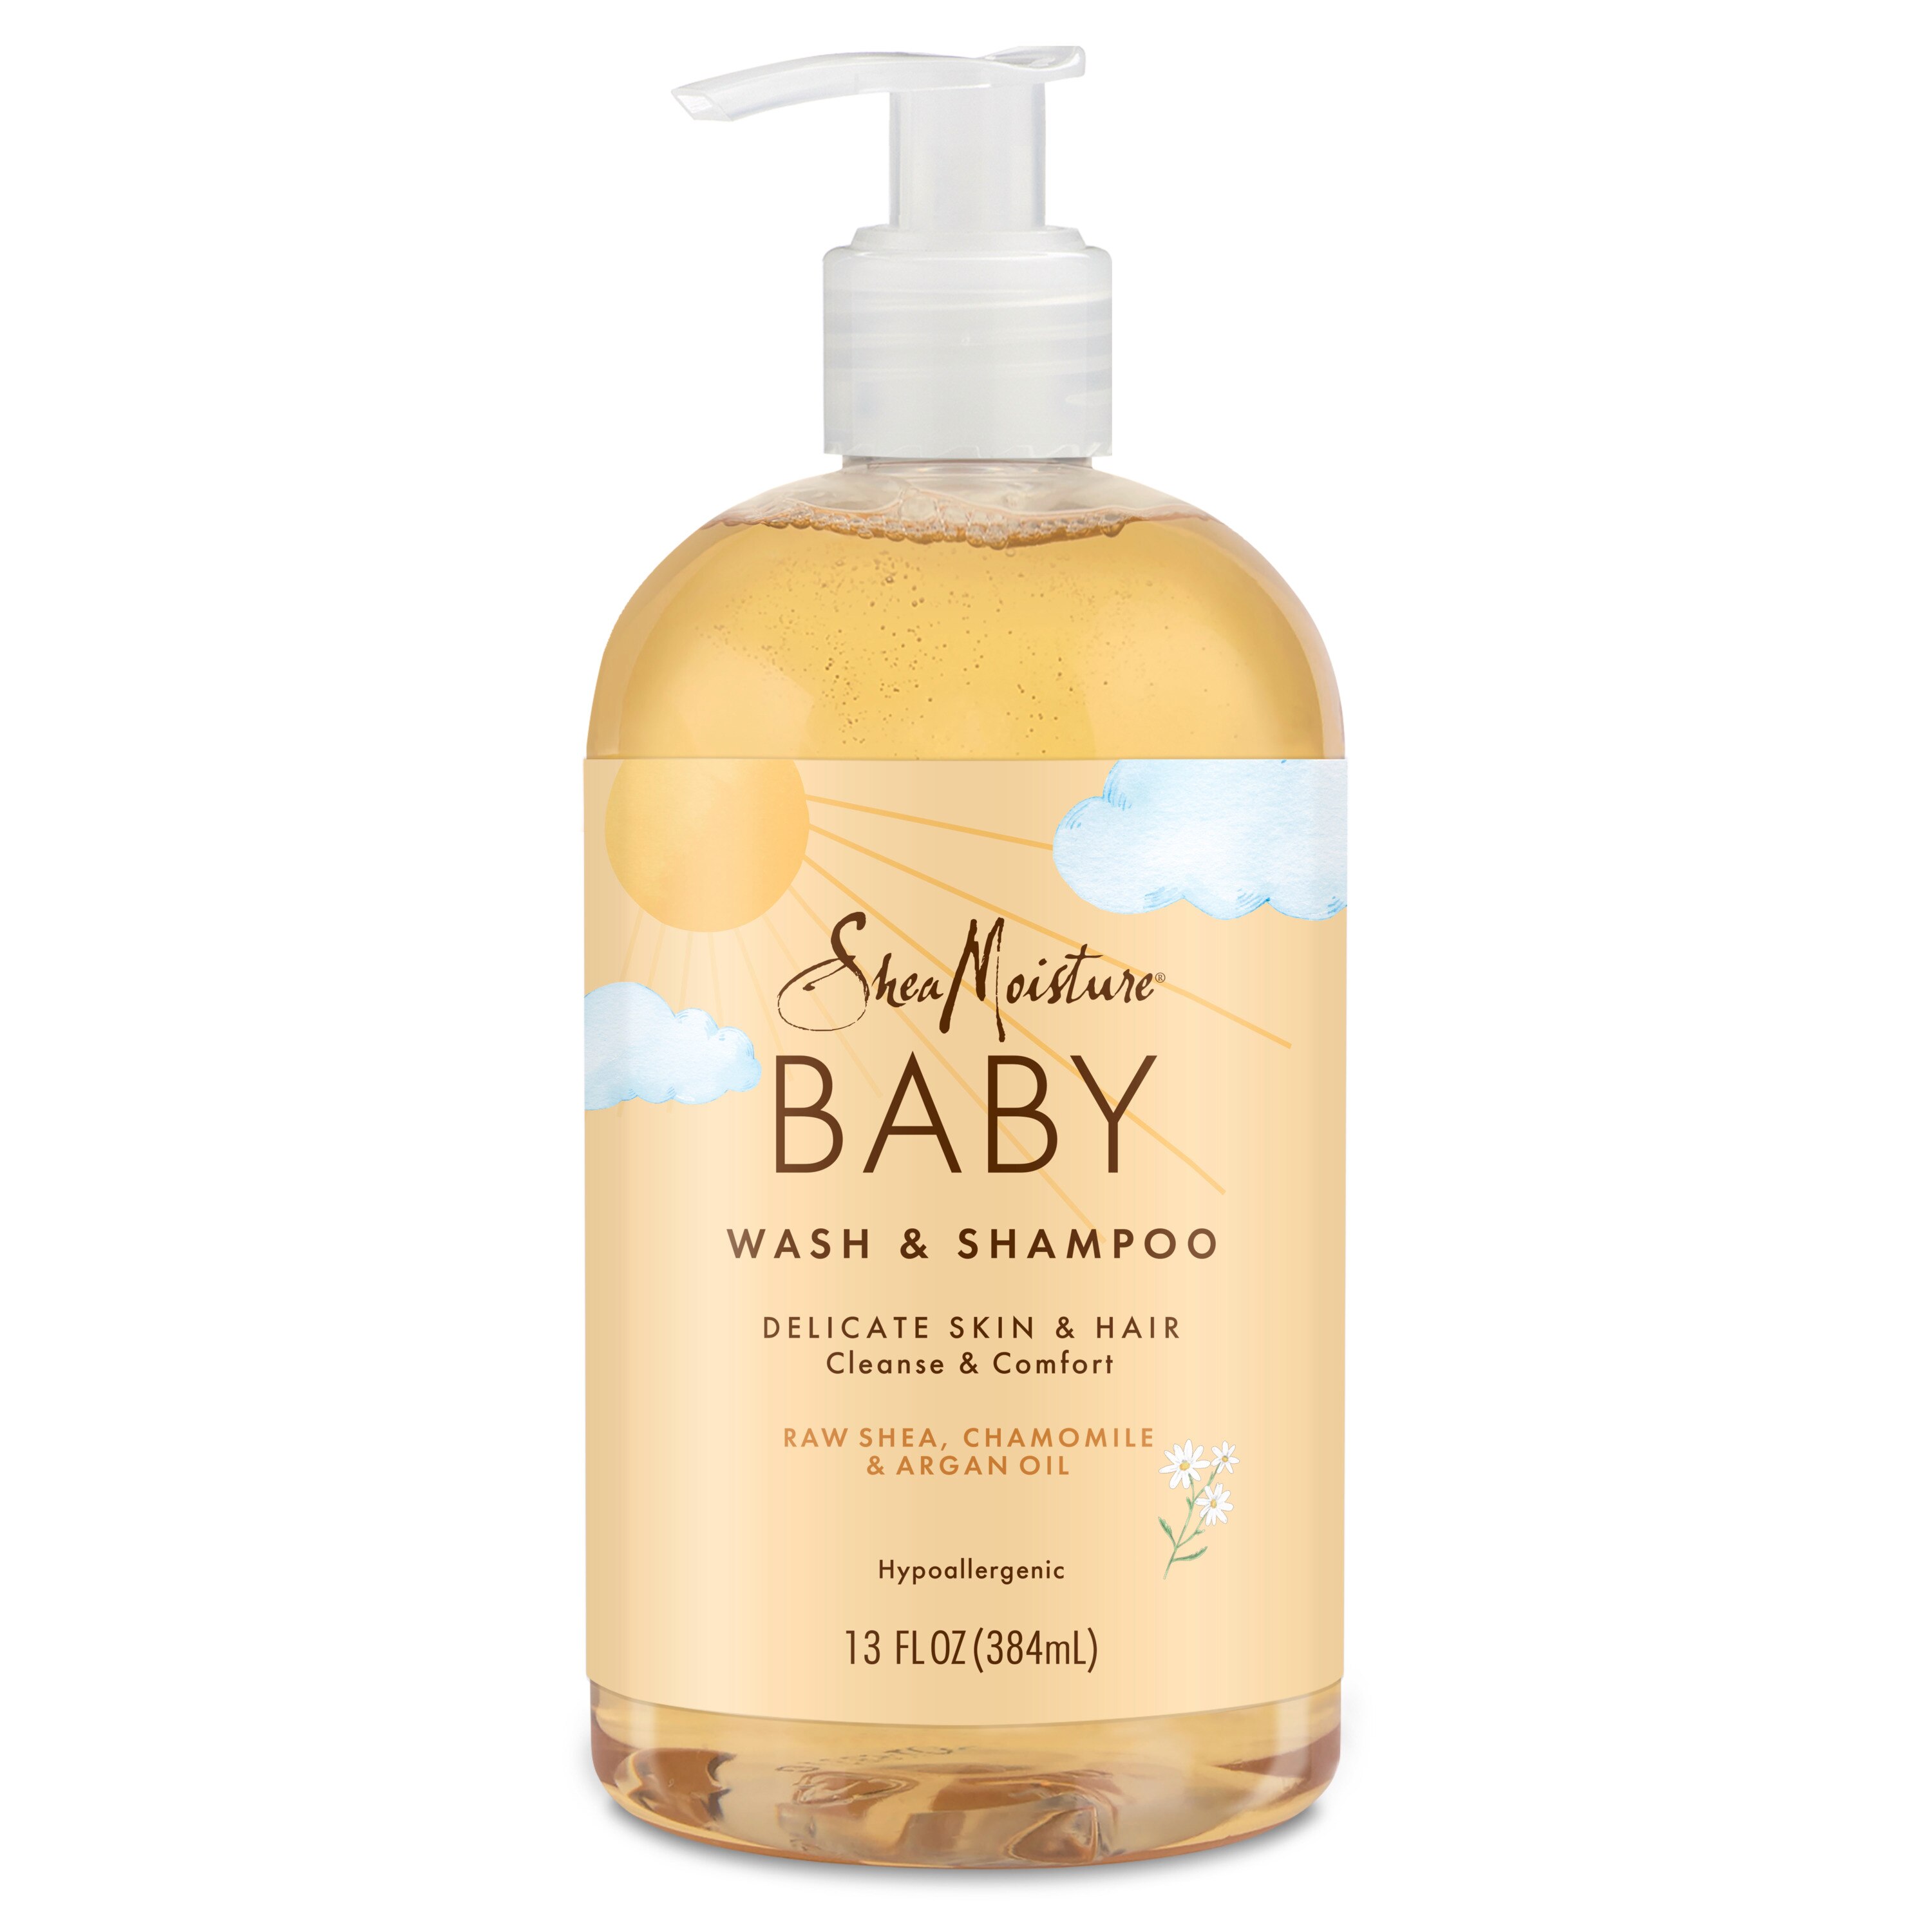 SheaMoisture Baby Wash and Shampoo with Frankincense and Myrrh to Help Cleanse Raw Shea, Chamomile and Argan Oil for All Skin Types, 13 OZ